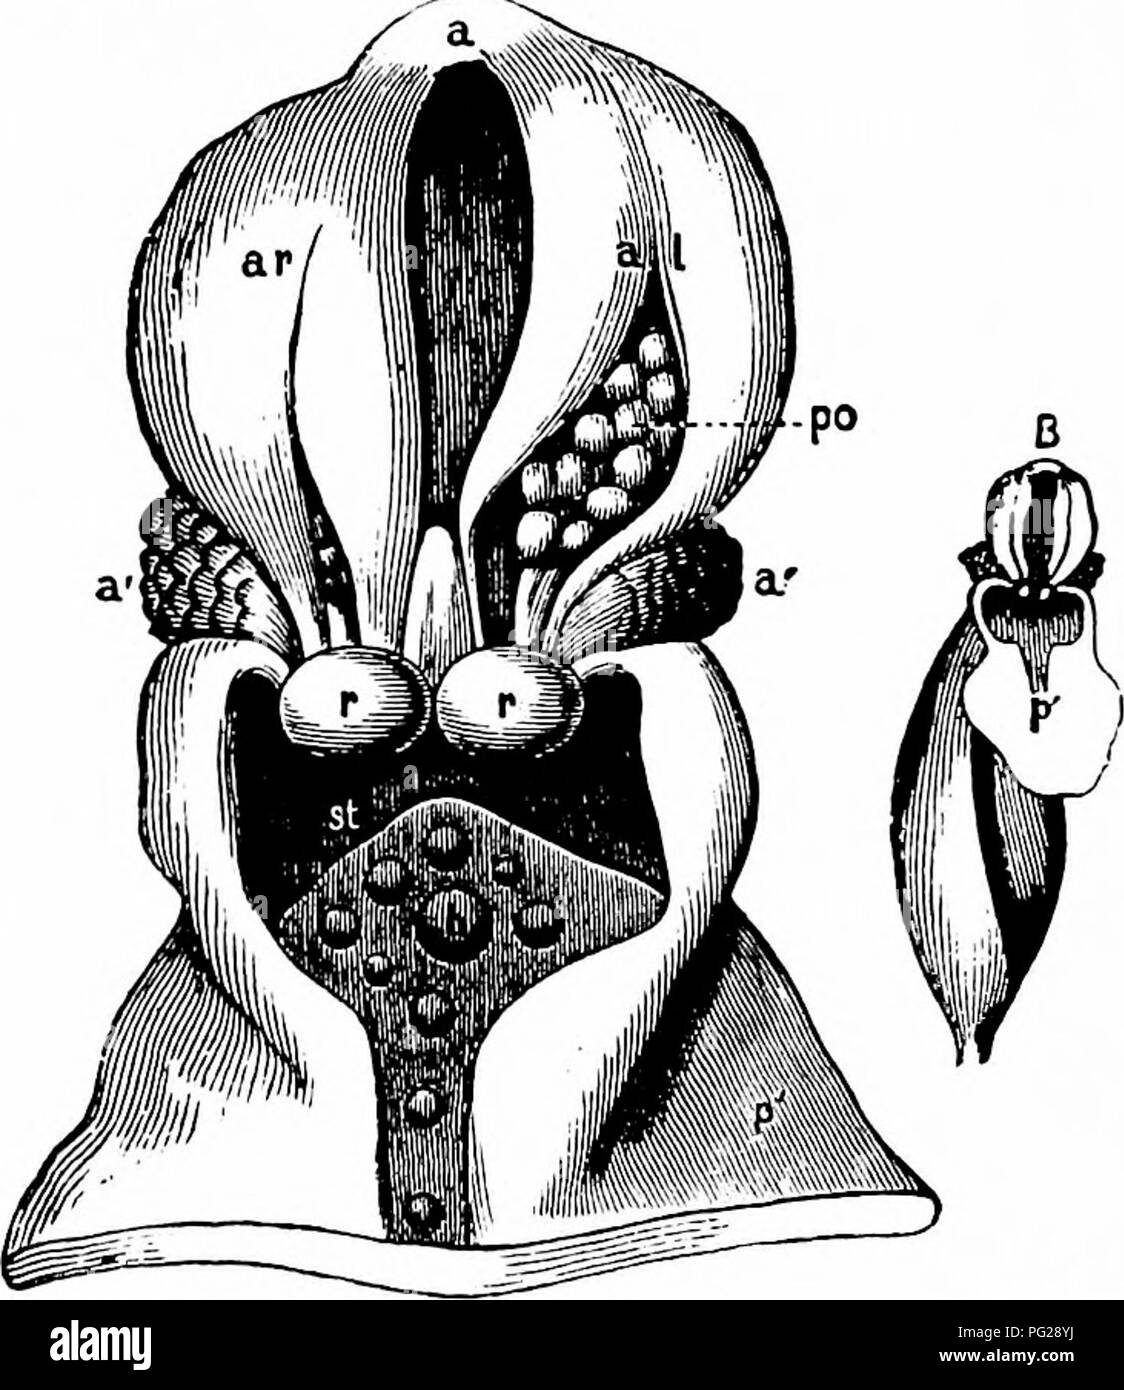 . Handbook of flower pollination : based upon Hermann Mu?ller's work 'The fertilisation of flowers by insects' . Fertilization of plants. Fig. 33. Lisiera ovaia, L., an Ichneumon Flower, agrees with the former species in the colour, form, and arrangement of its flowers, only differing in that these are smaller. There is still, however, a necessity for direct observation to confirm this supposition, since the agents which pollinate Listera cordata are as yet unknown. The two species Just named belong to the class of flowers possessing exposed nectar, in connection with which they have therefore Stock Photo